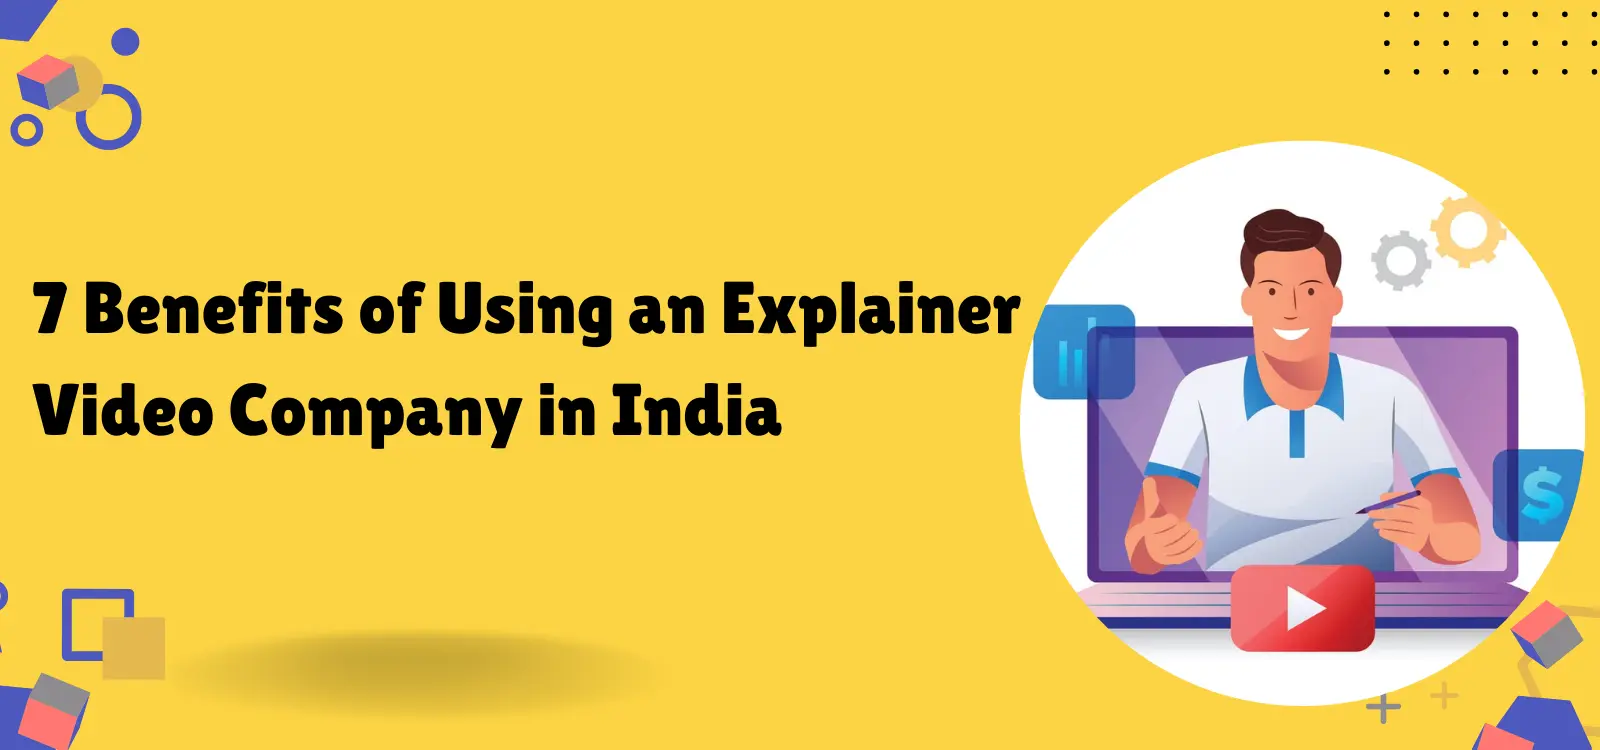 7 Benefits of Using an Explainer Video Company in India